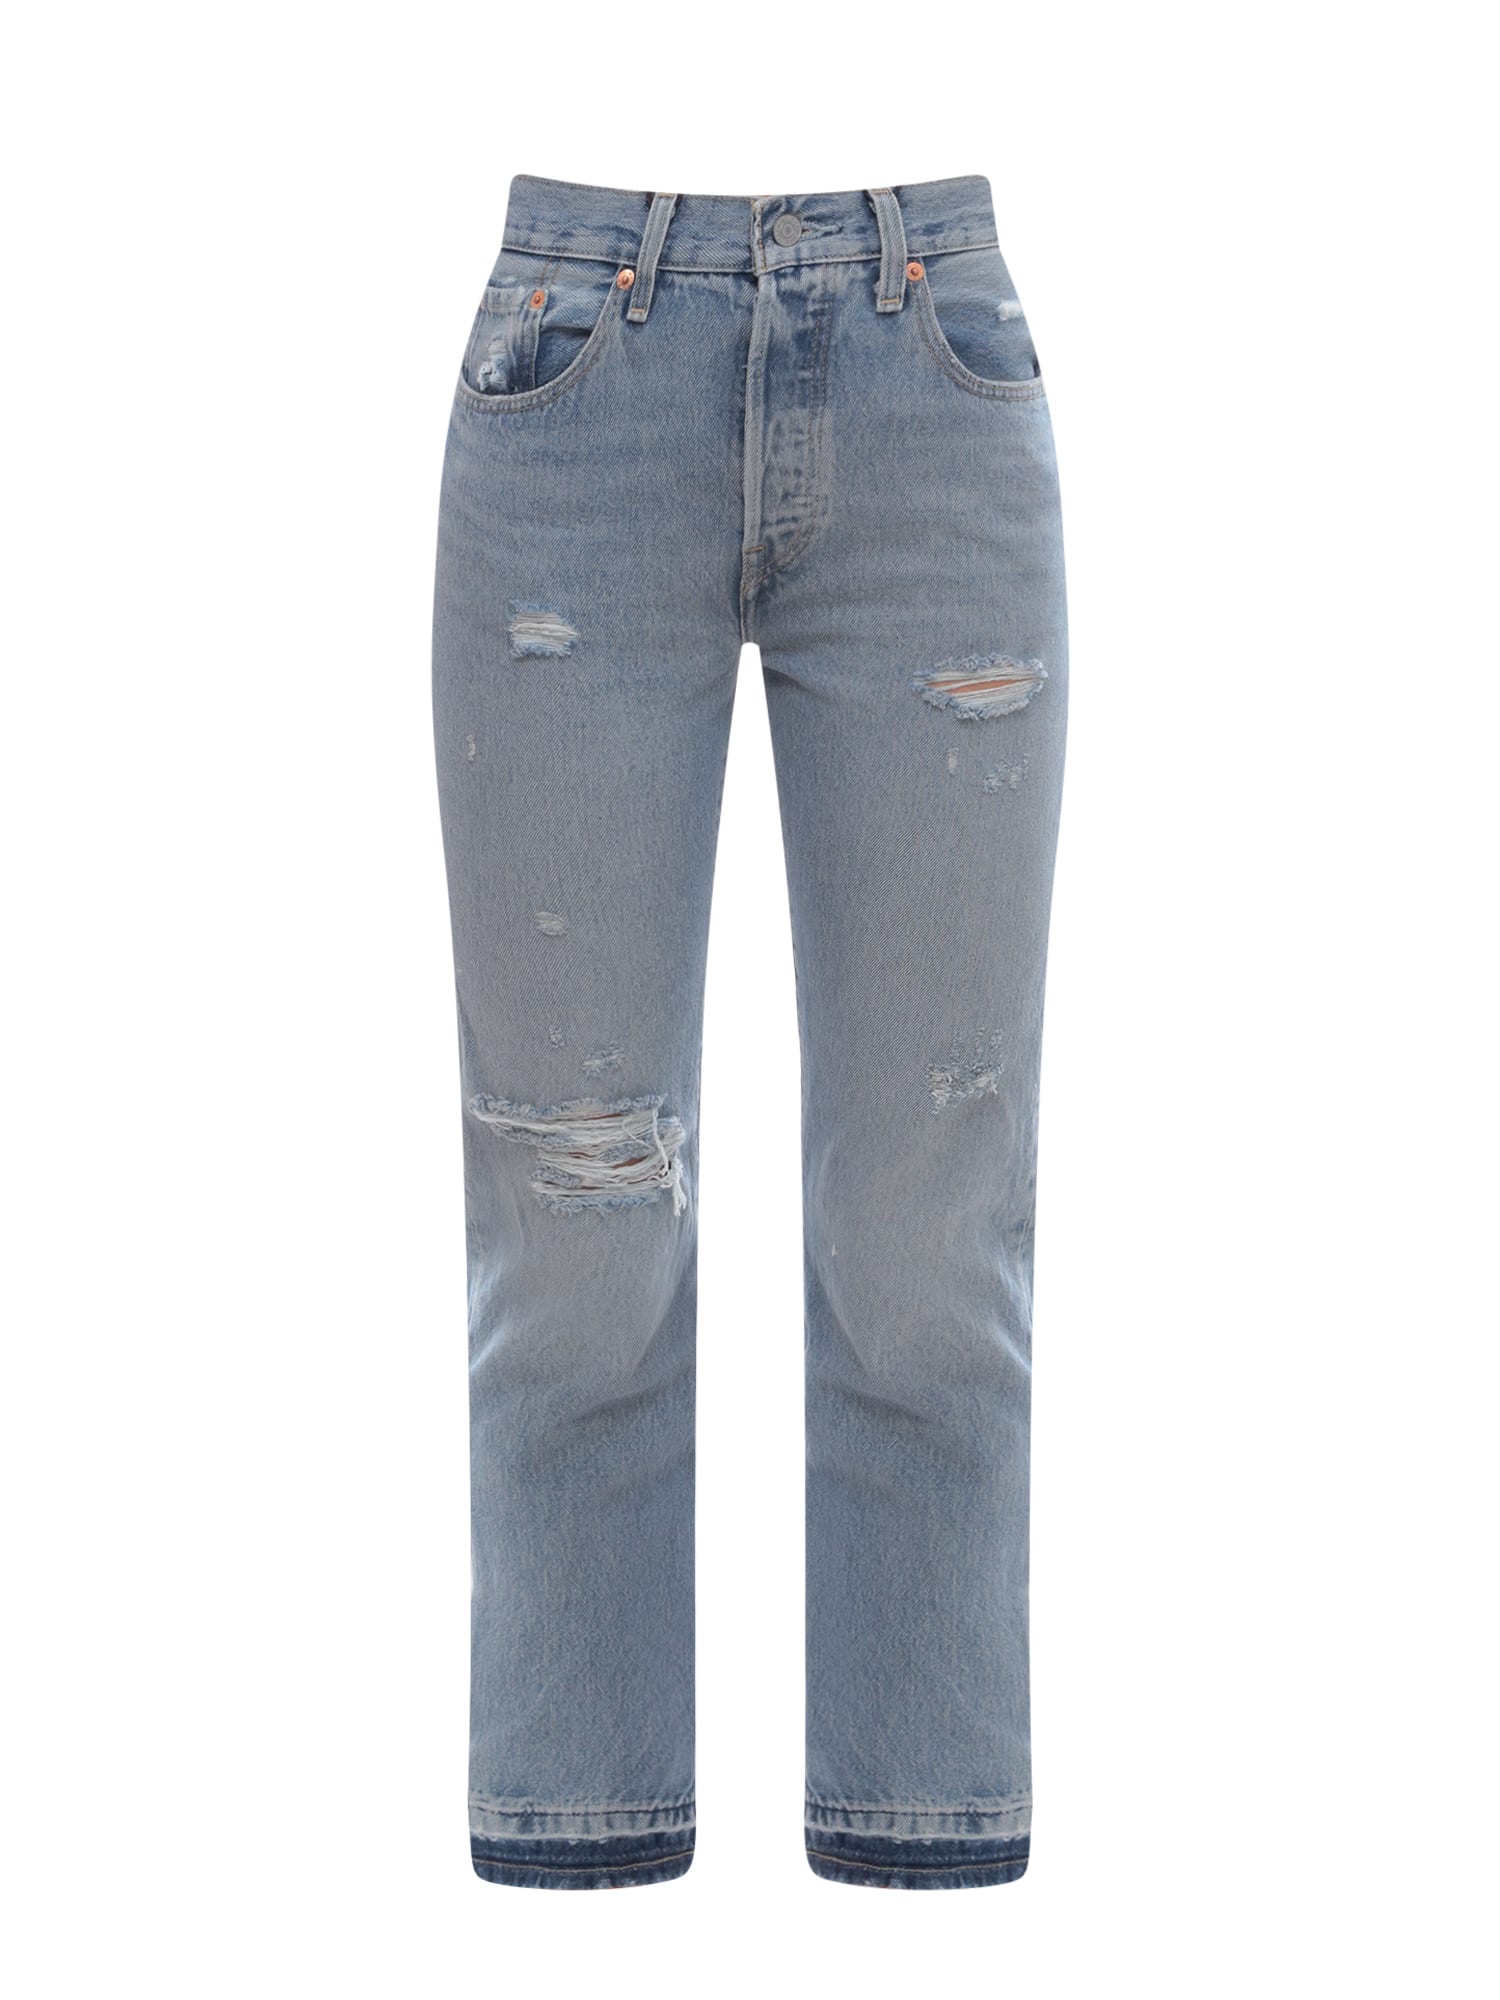 Levi's 501 Origianal Cropped Jeans